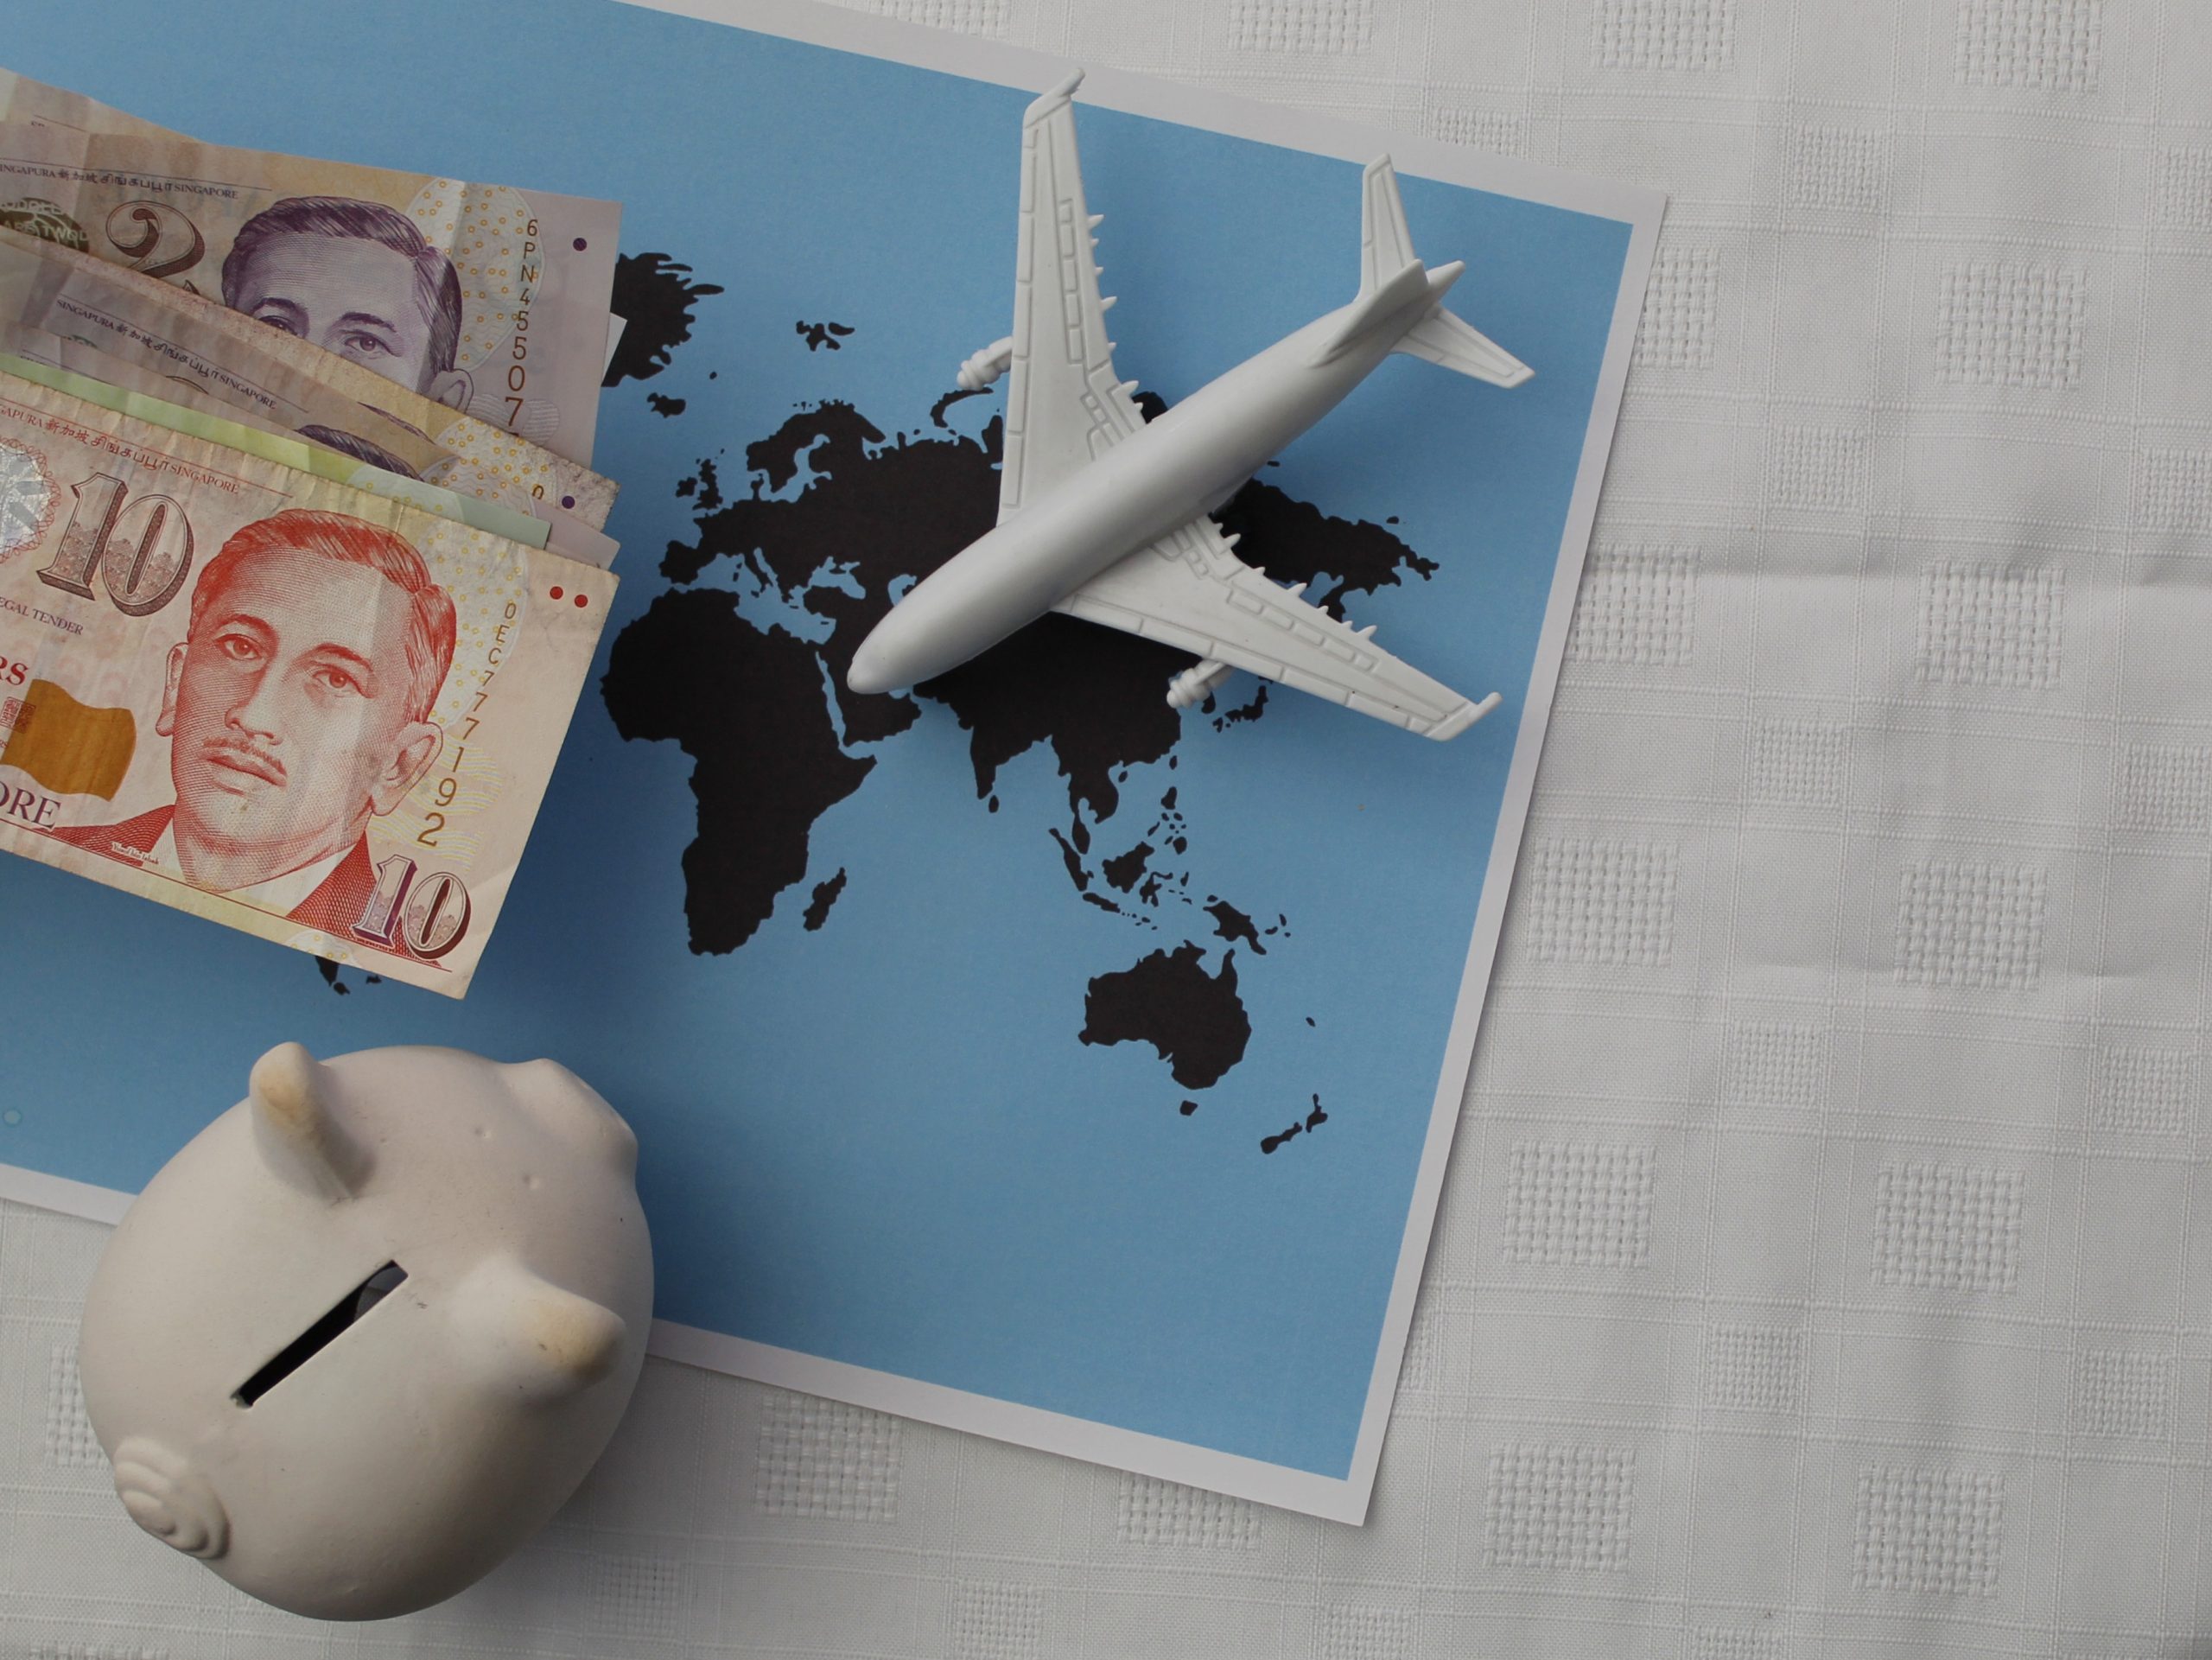 Singaporean money, figure of an airplane and piggy bank on a sheet with a world map